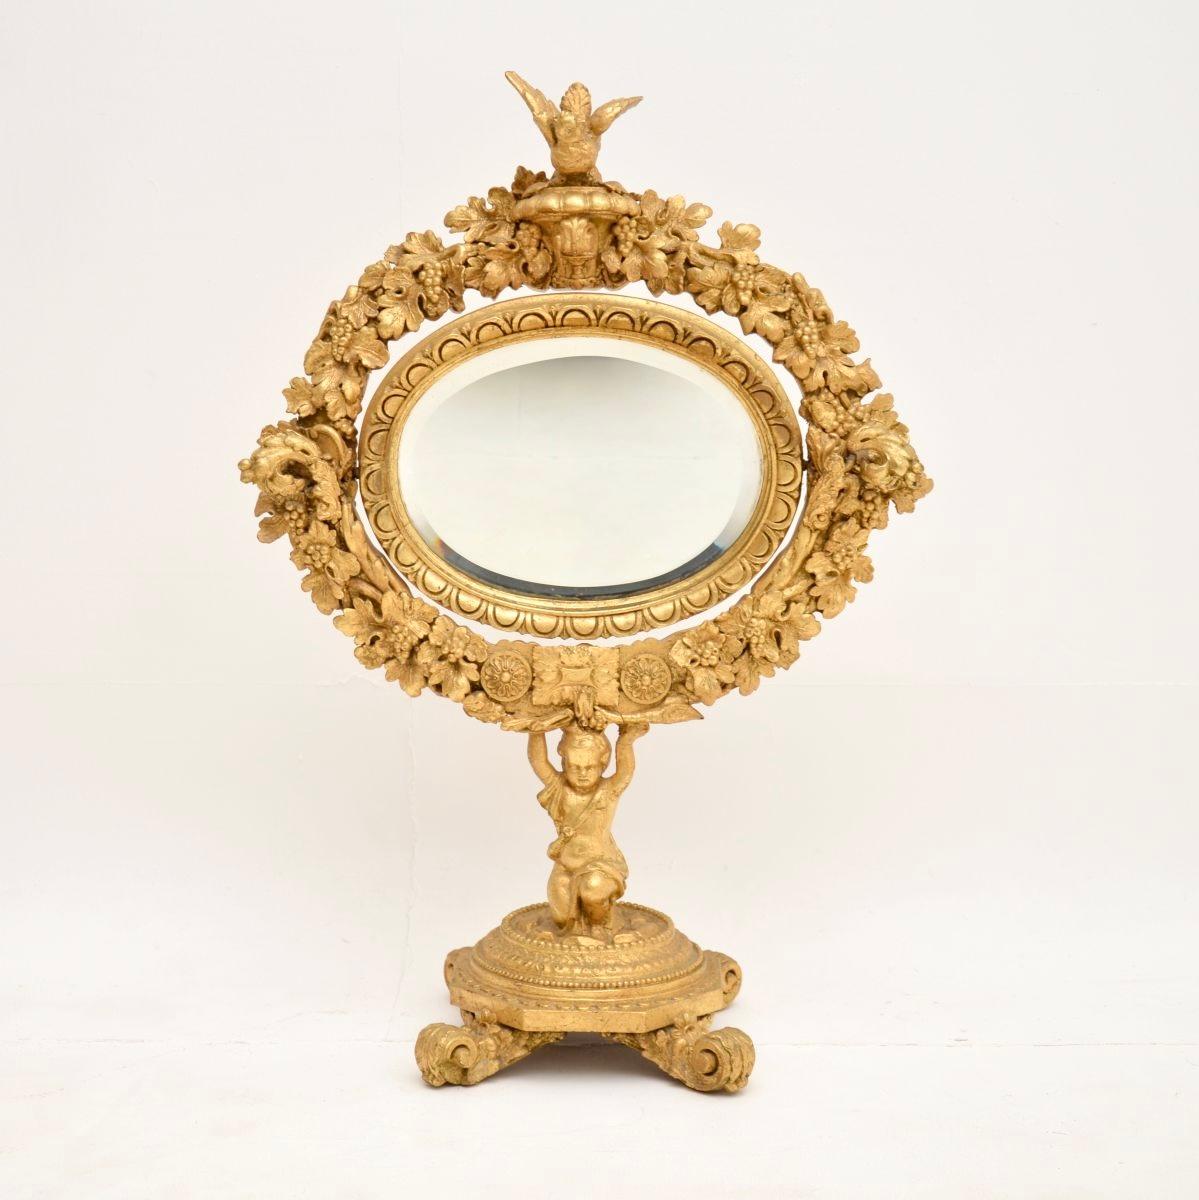 A stunning antique Victorian carved gilt wood vanity mirror, made in England and dating from around the 1850-1870 period.

It is of superb quality and is an impressive size, it is beautifully carved with intricate details throughout. The oval mirror